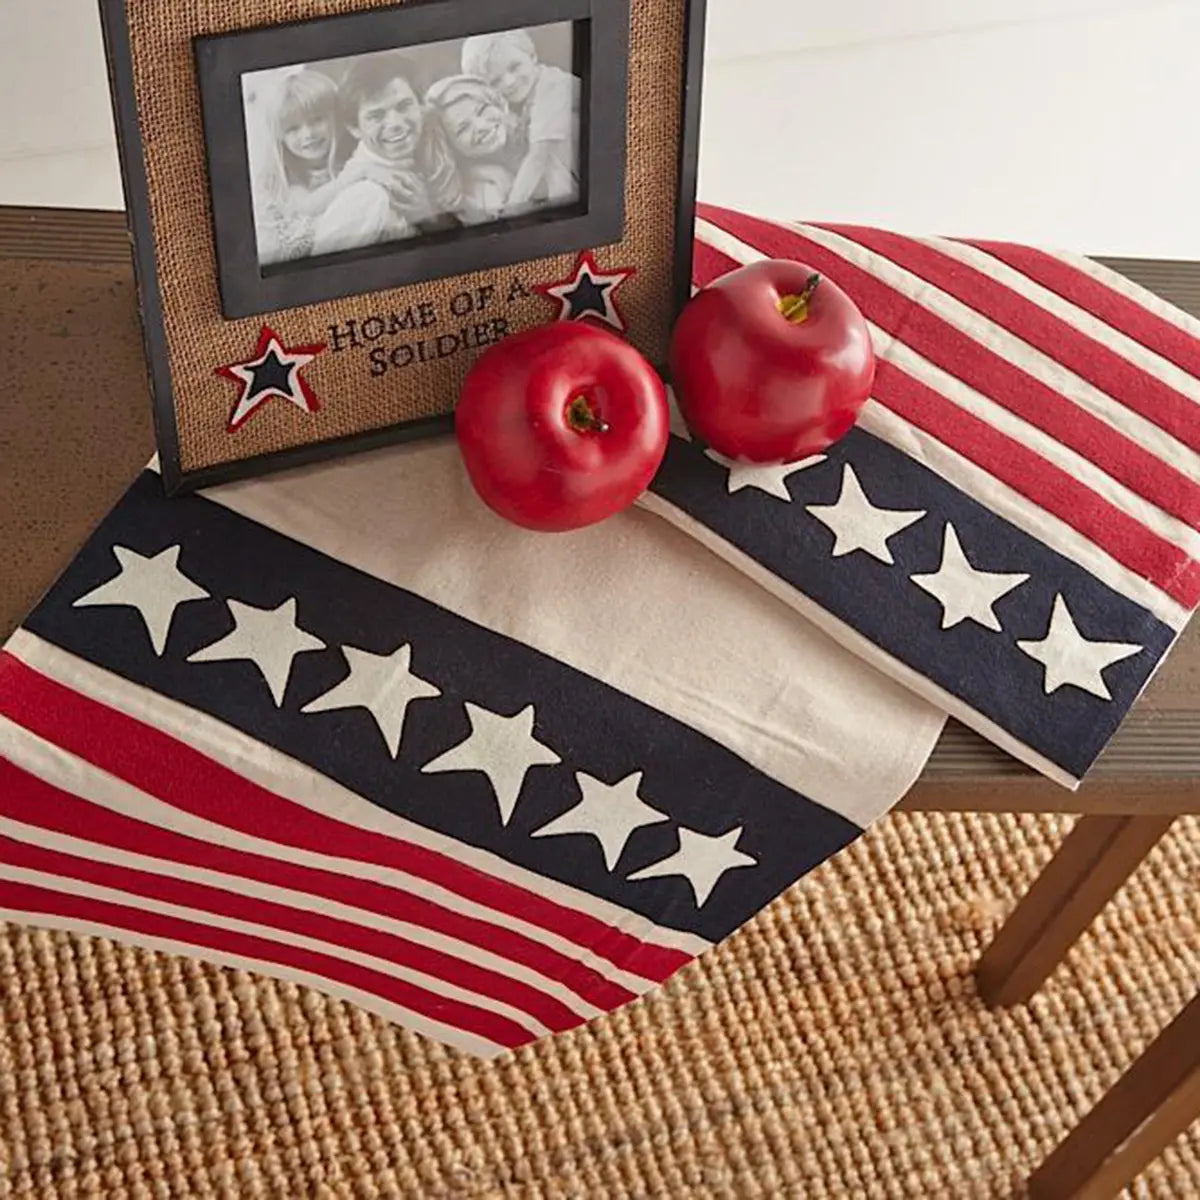 K and K Interiors Red Apple laid on top of a flag on a bench with a picture frame, showing a photo of family. The Photo frame reads Home of Soldier.